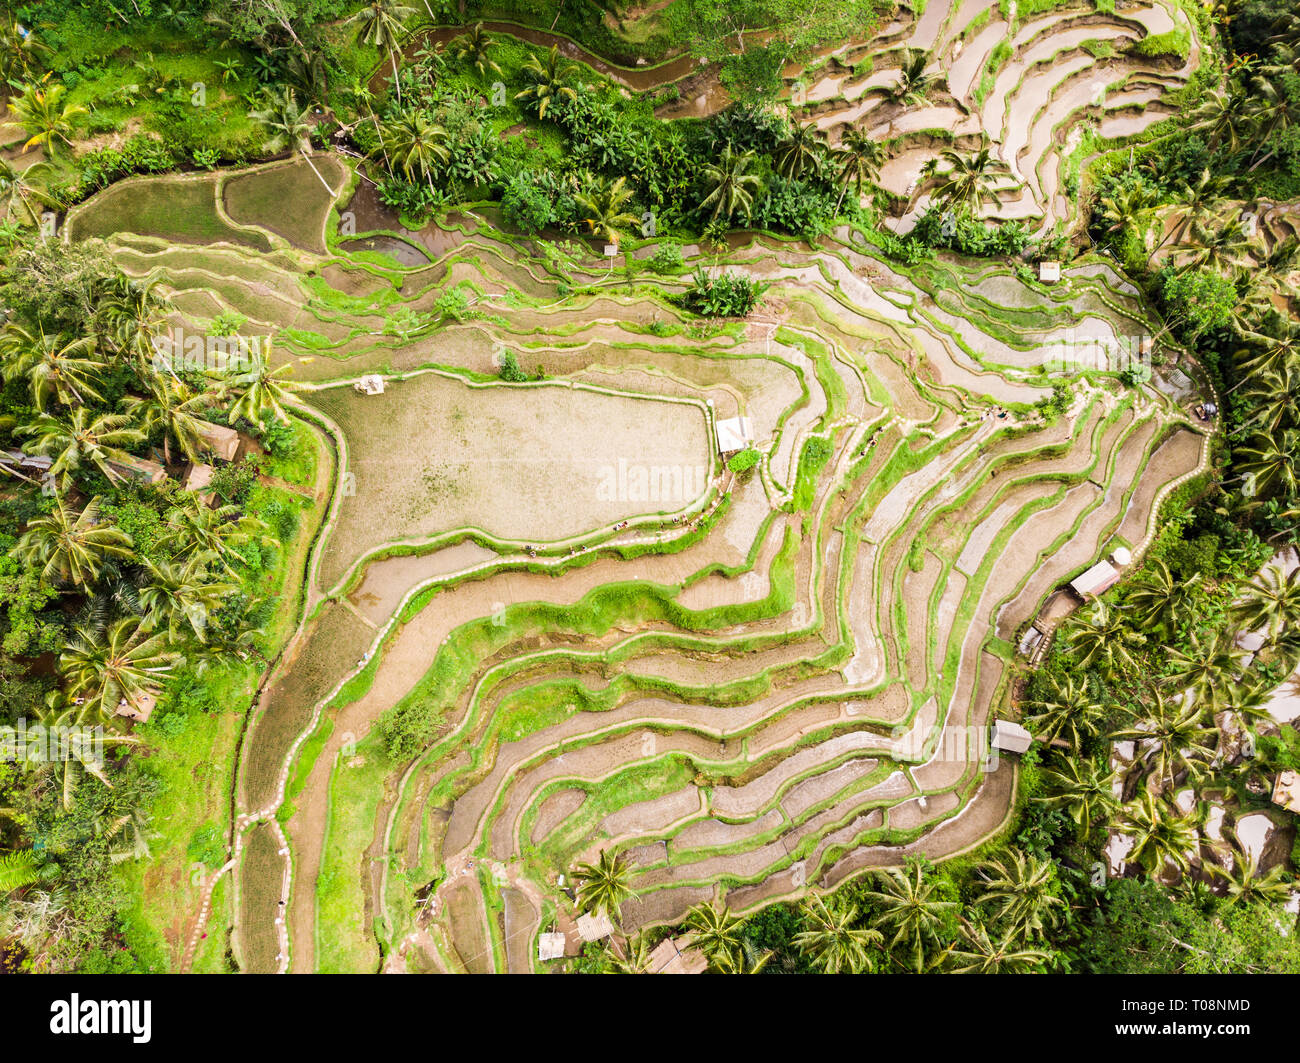 Drone view of Tegalalang rice terrace in Bali, Indonesia, with palm trees and paths for touristr to walk around plantations Stock Photo